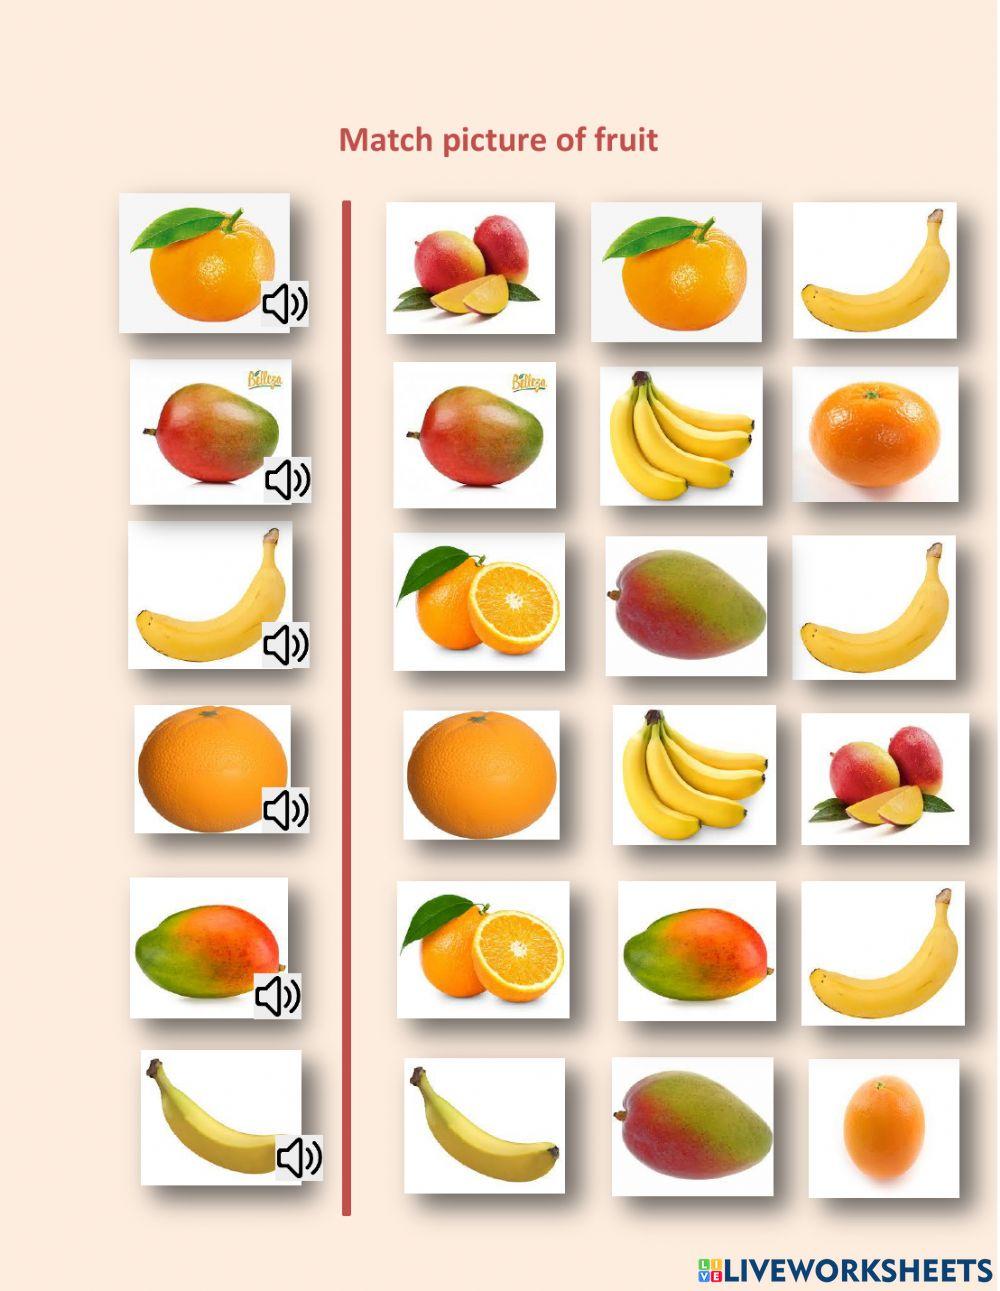 Match picture to object - orange, mango and banana - 1.03 - DC